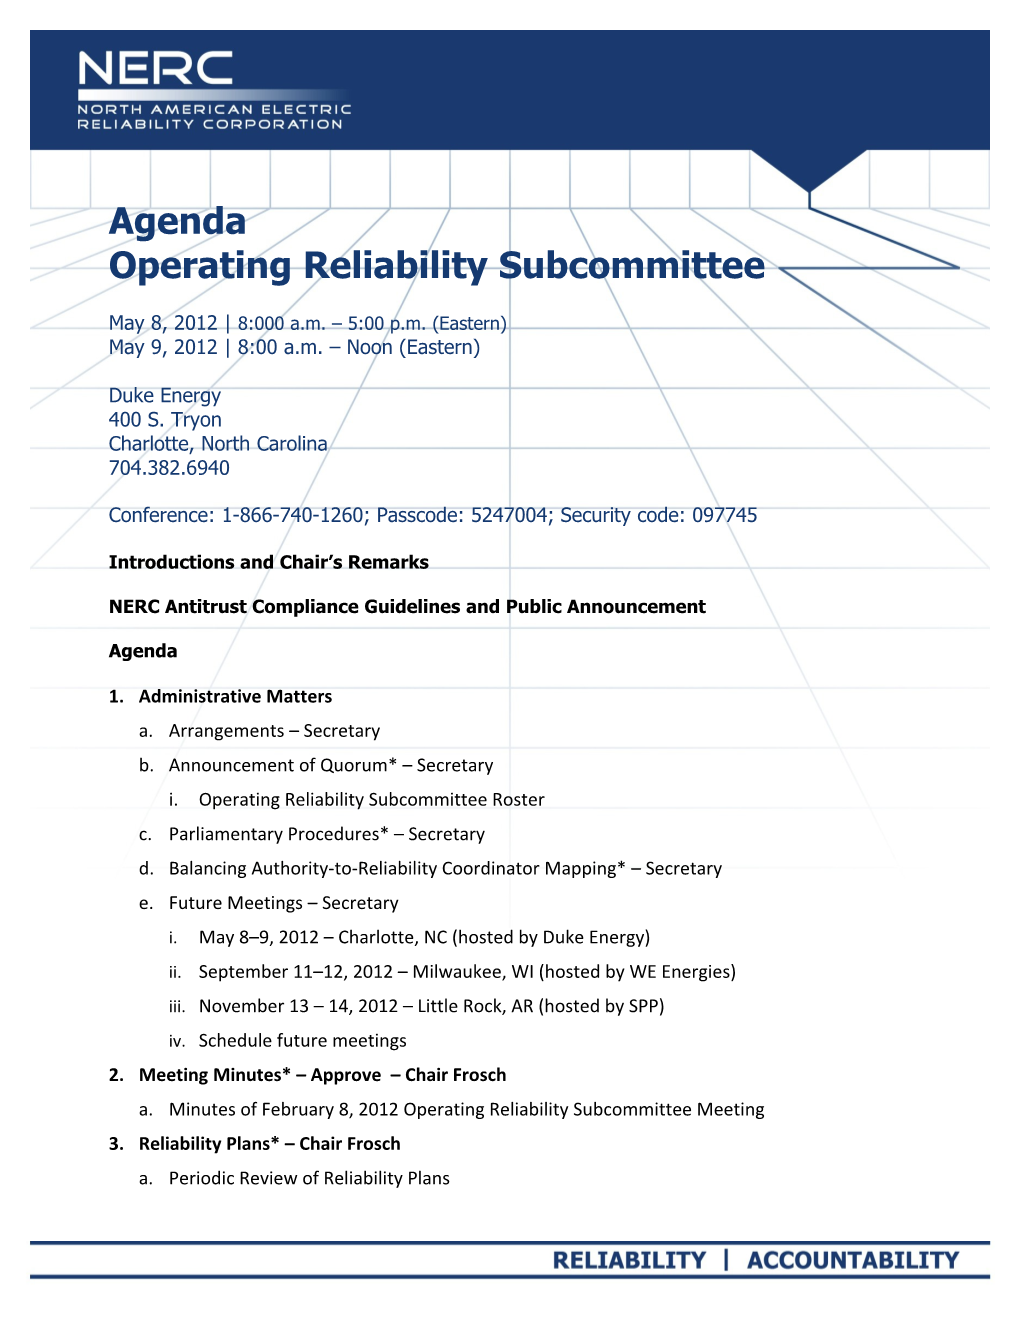 Operating Reliability Subcommittee